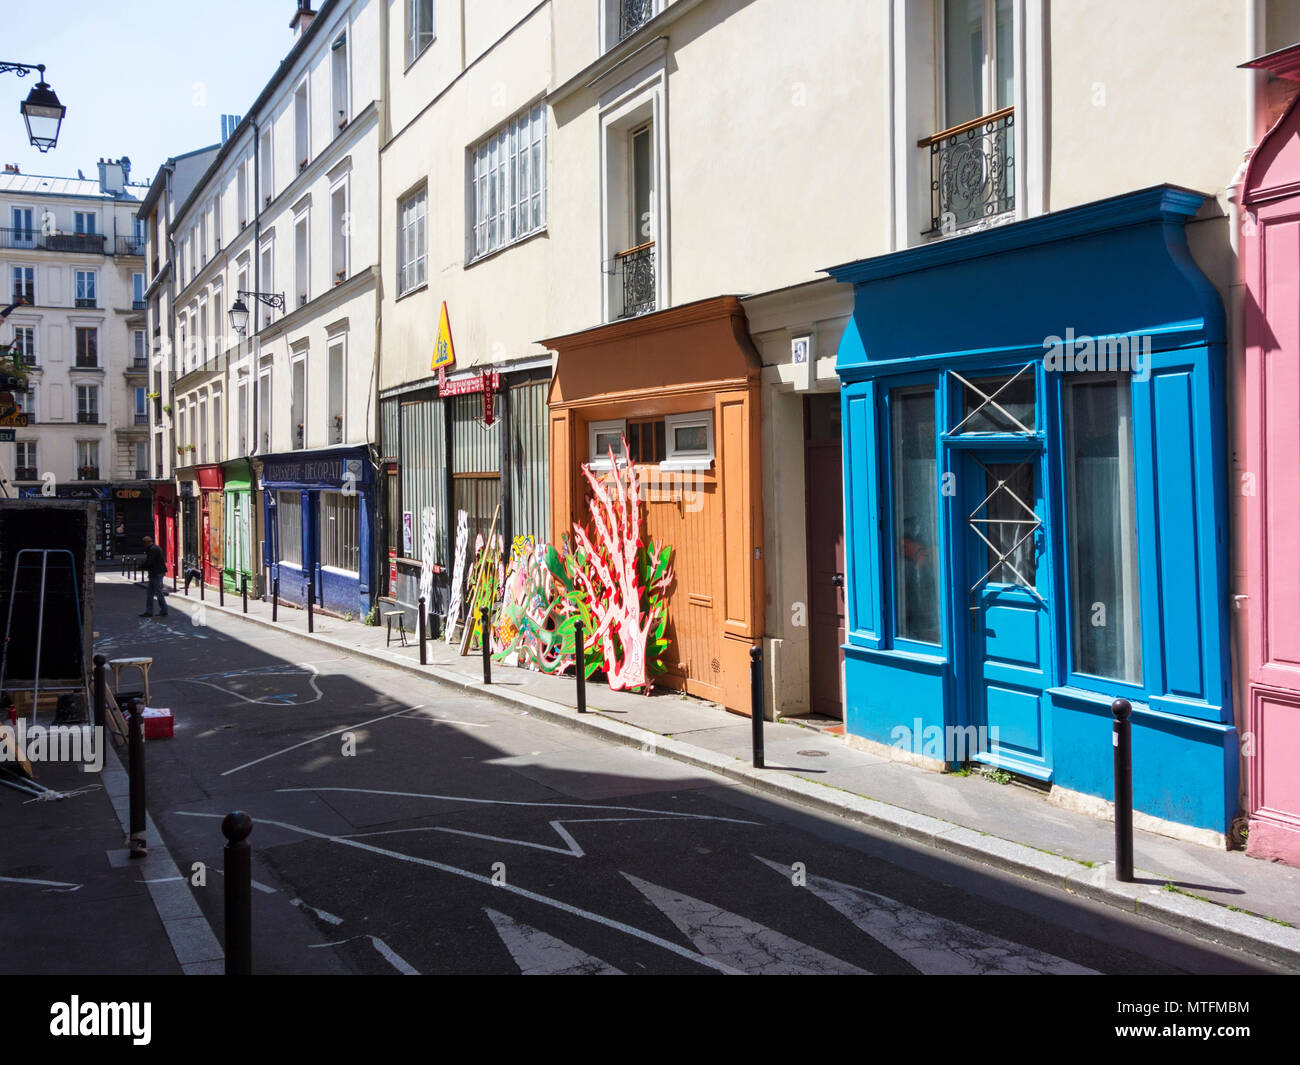 Rue St-Marthe, Paris. The Sainte-Marthe quarter, one of the city's oldest, is known for its thriving creative scene. Stock Photo